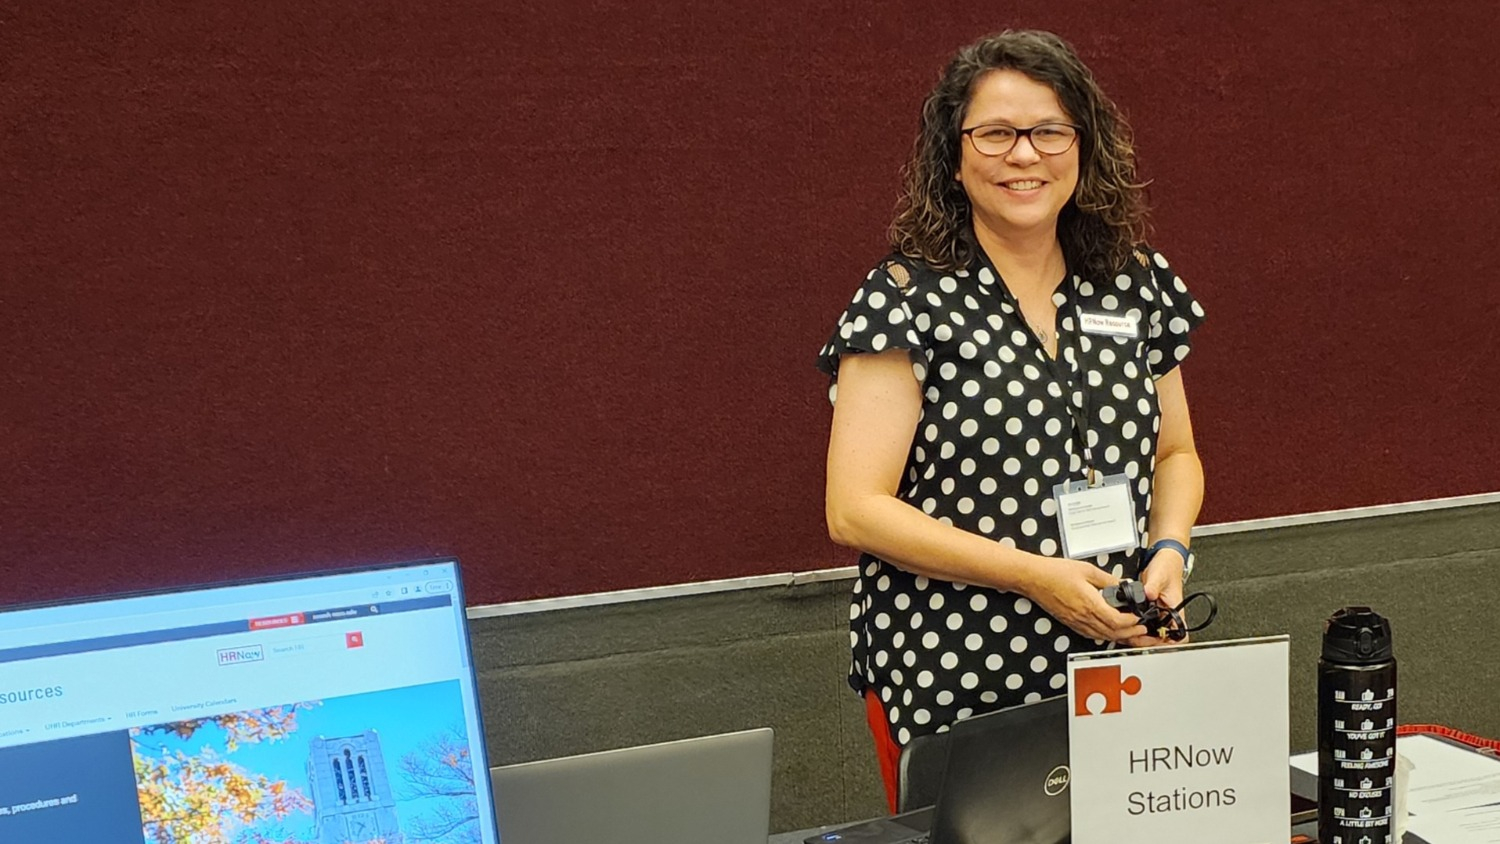 A picture of Amy Grubbs, manager of the Onboarding Center at NC State, staffing an HRNow station at at the HR Professionals Conference on July 27.